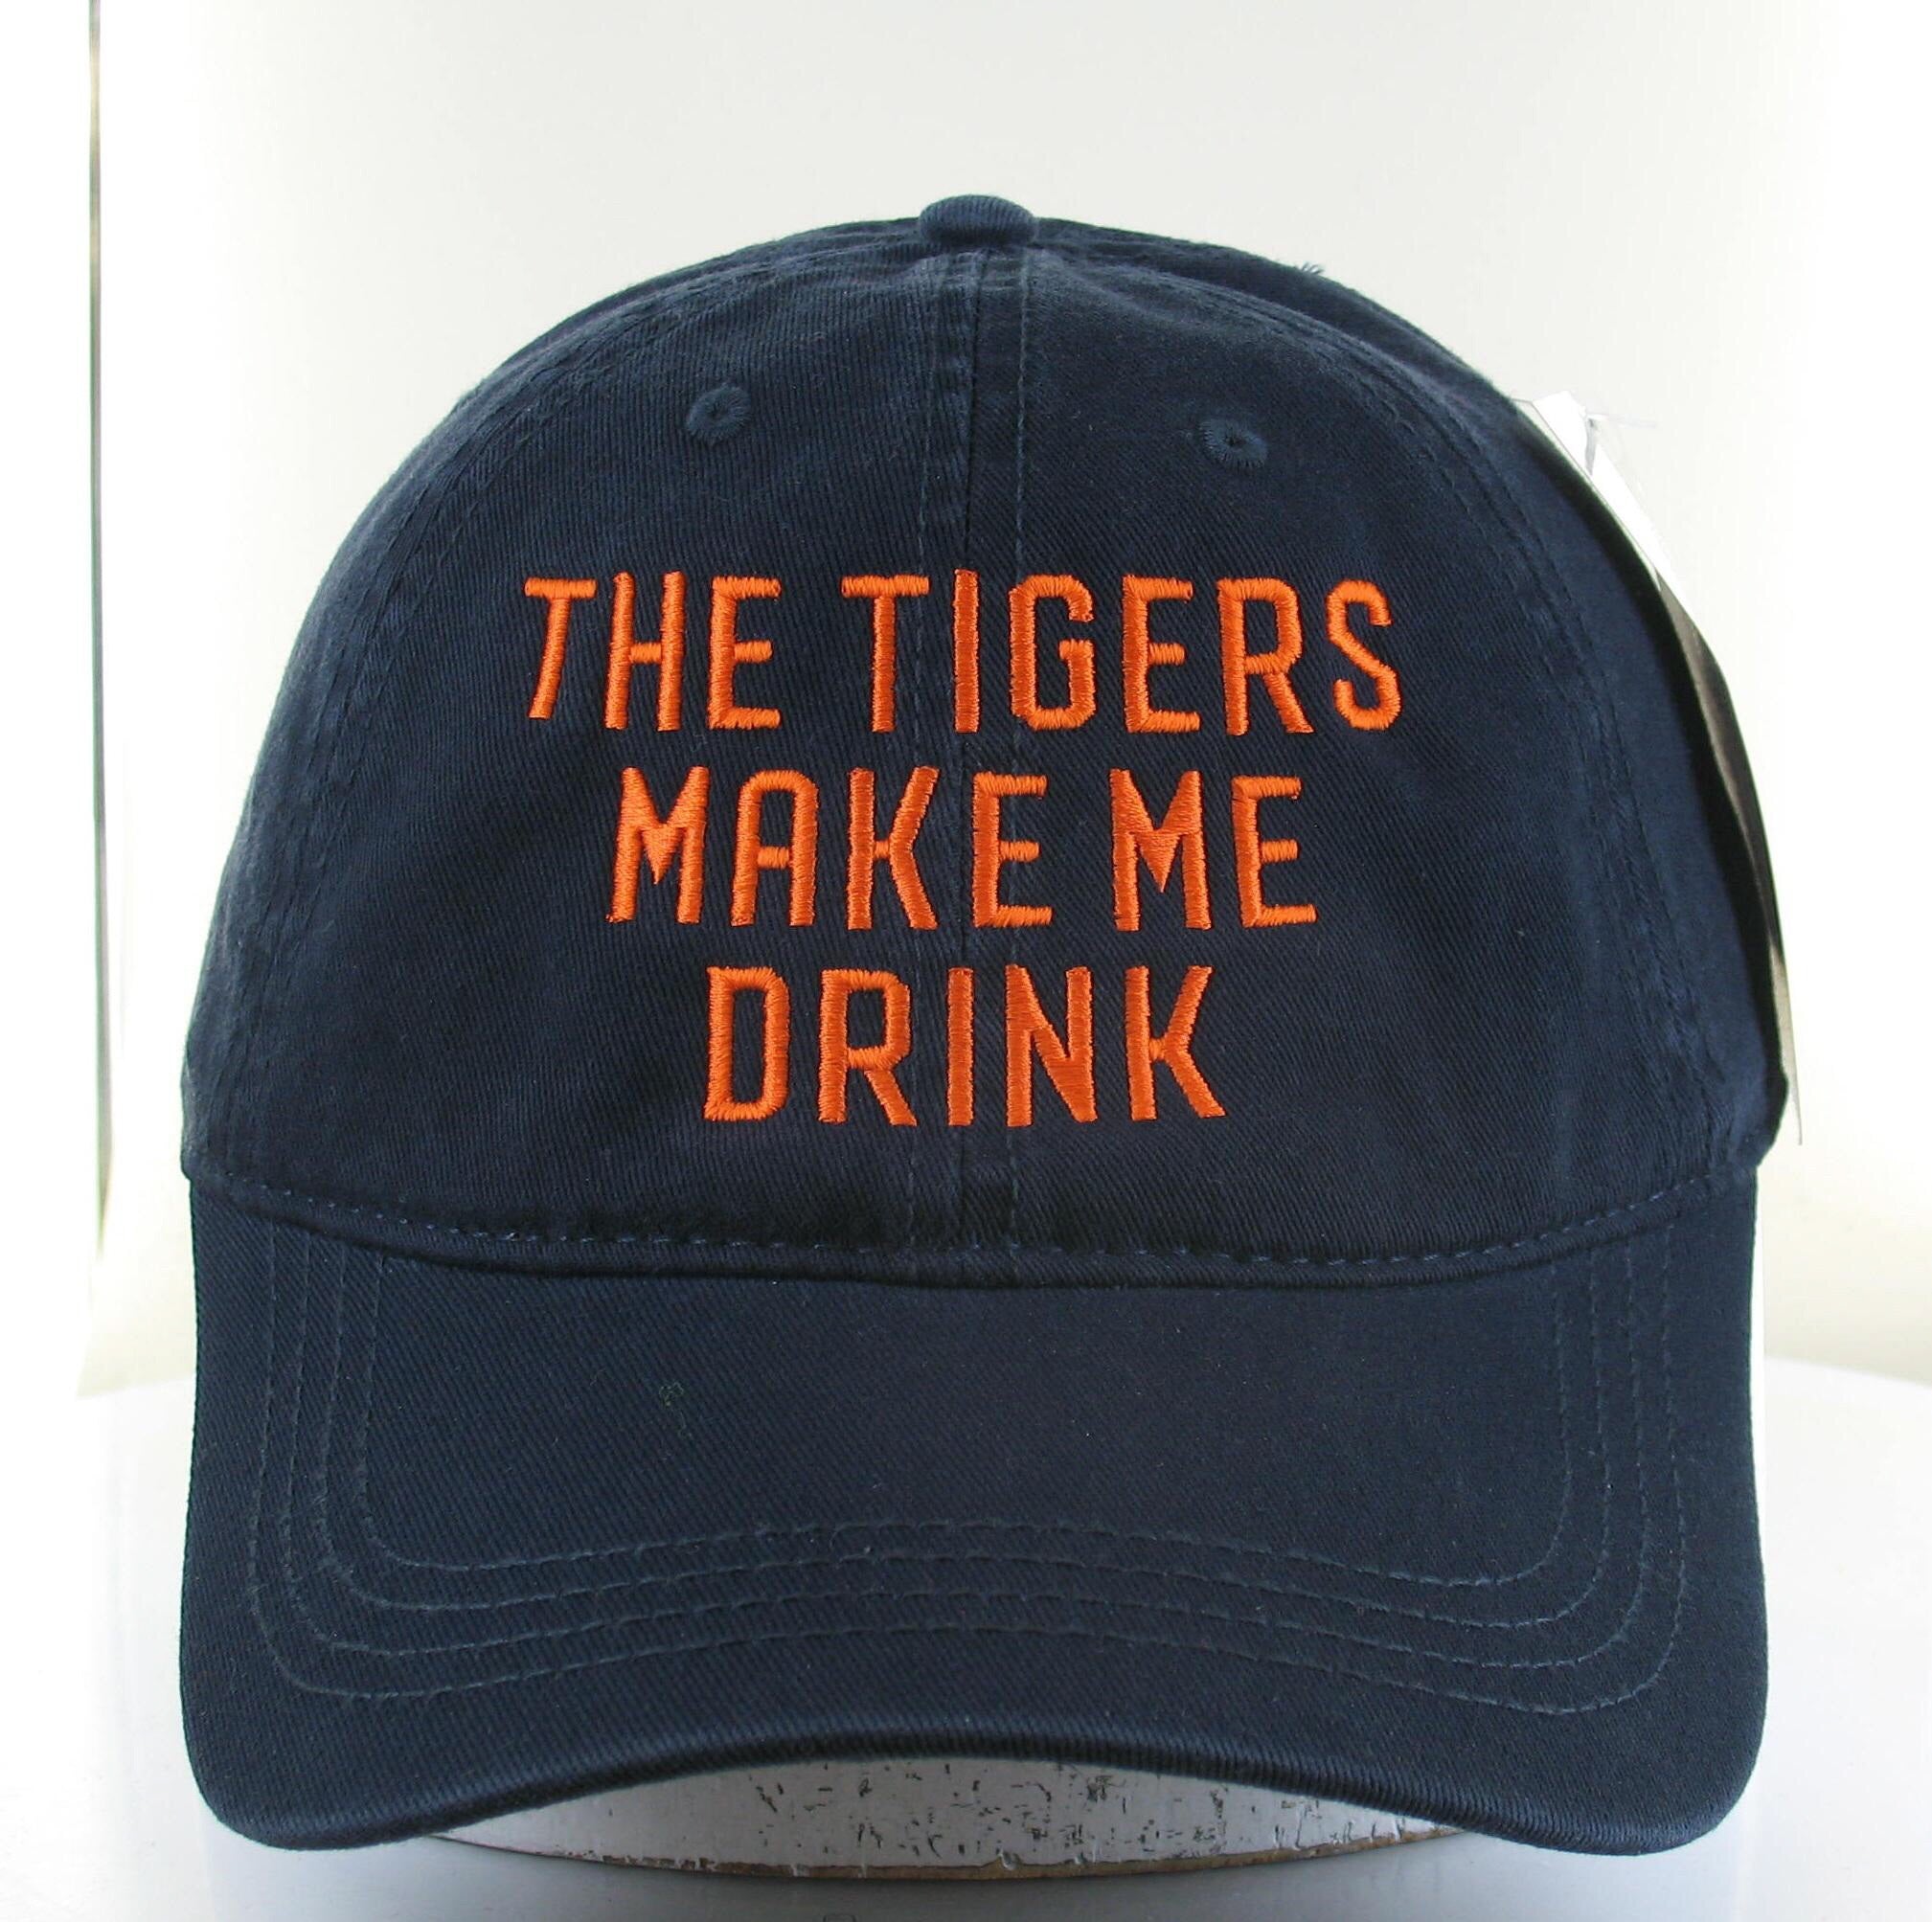 Hat - The Tigers Make Me Drink